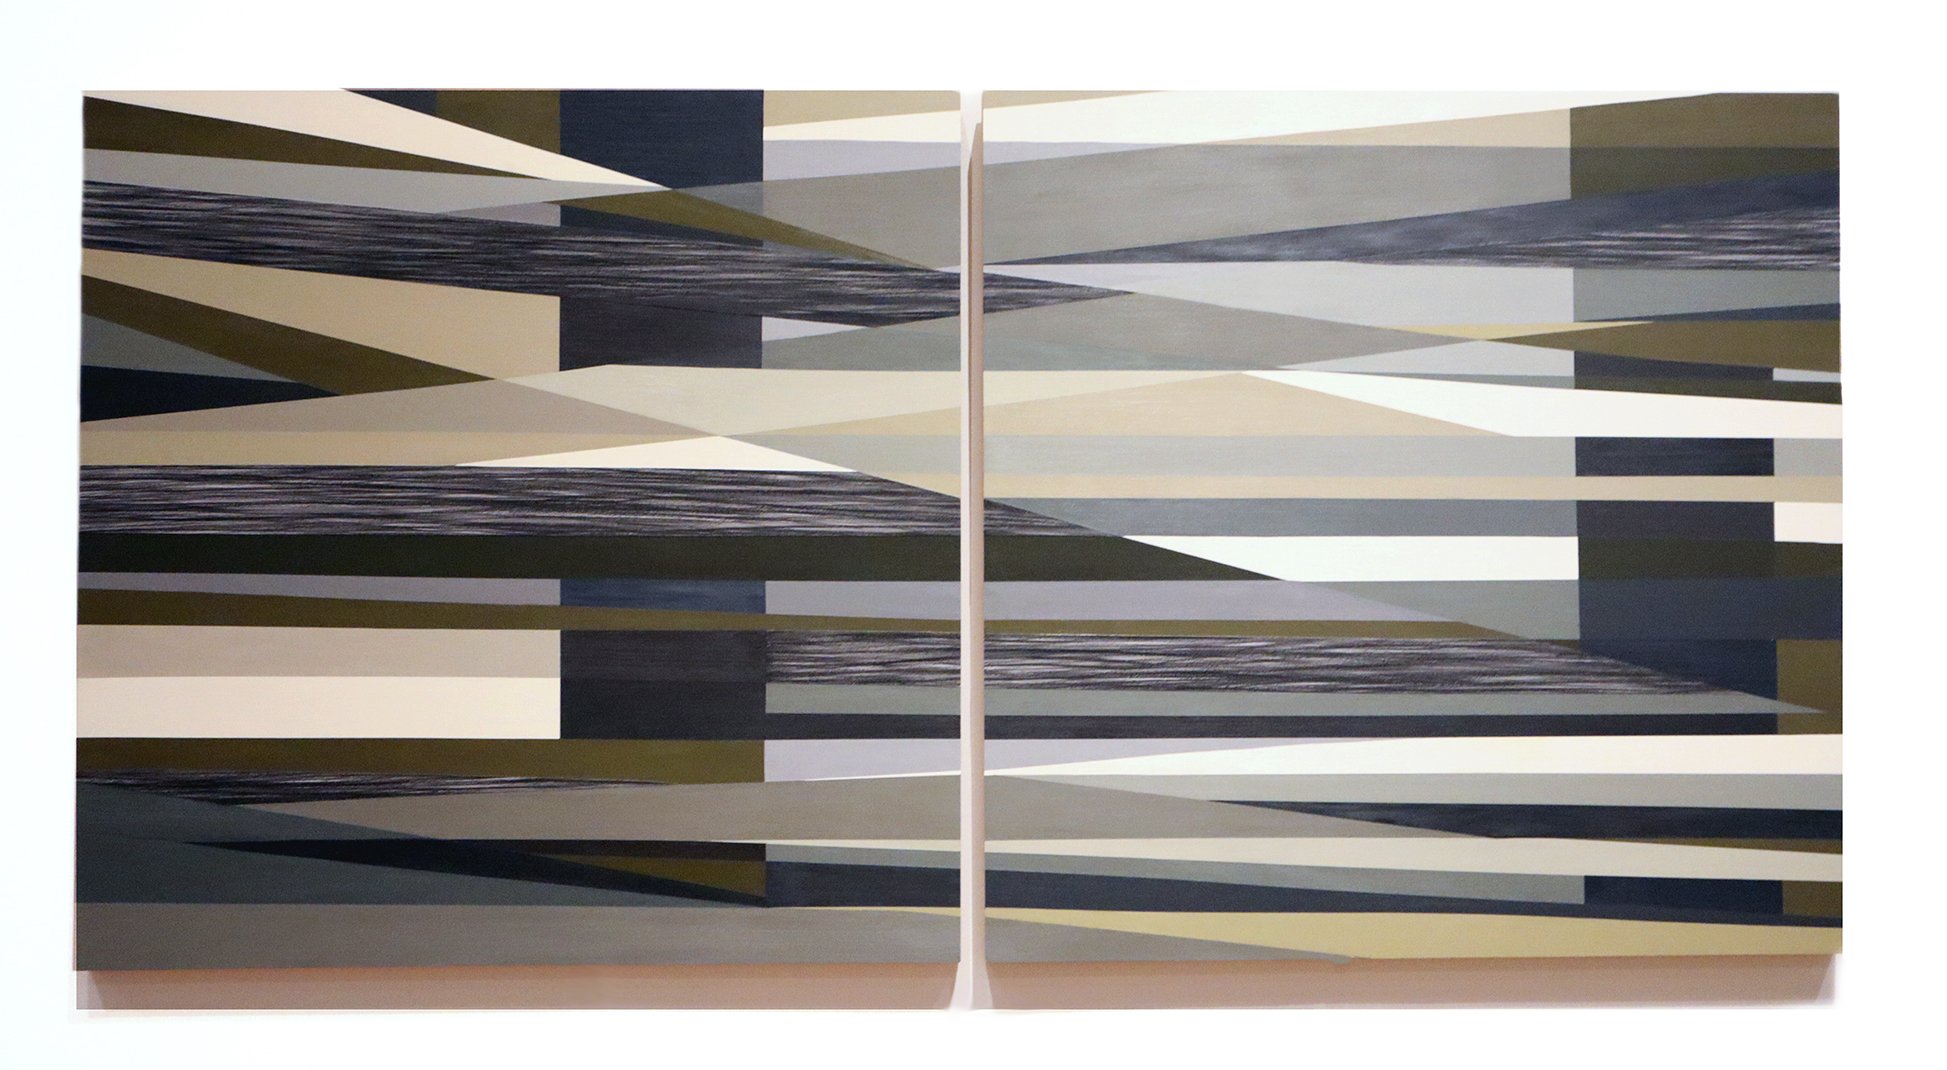   Fence Posts (Texas) . 2023. Acrylic paint, graphite &amp; paper on panel. 36 x 72 inches 